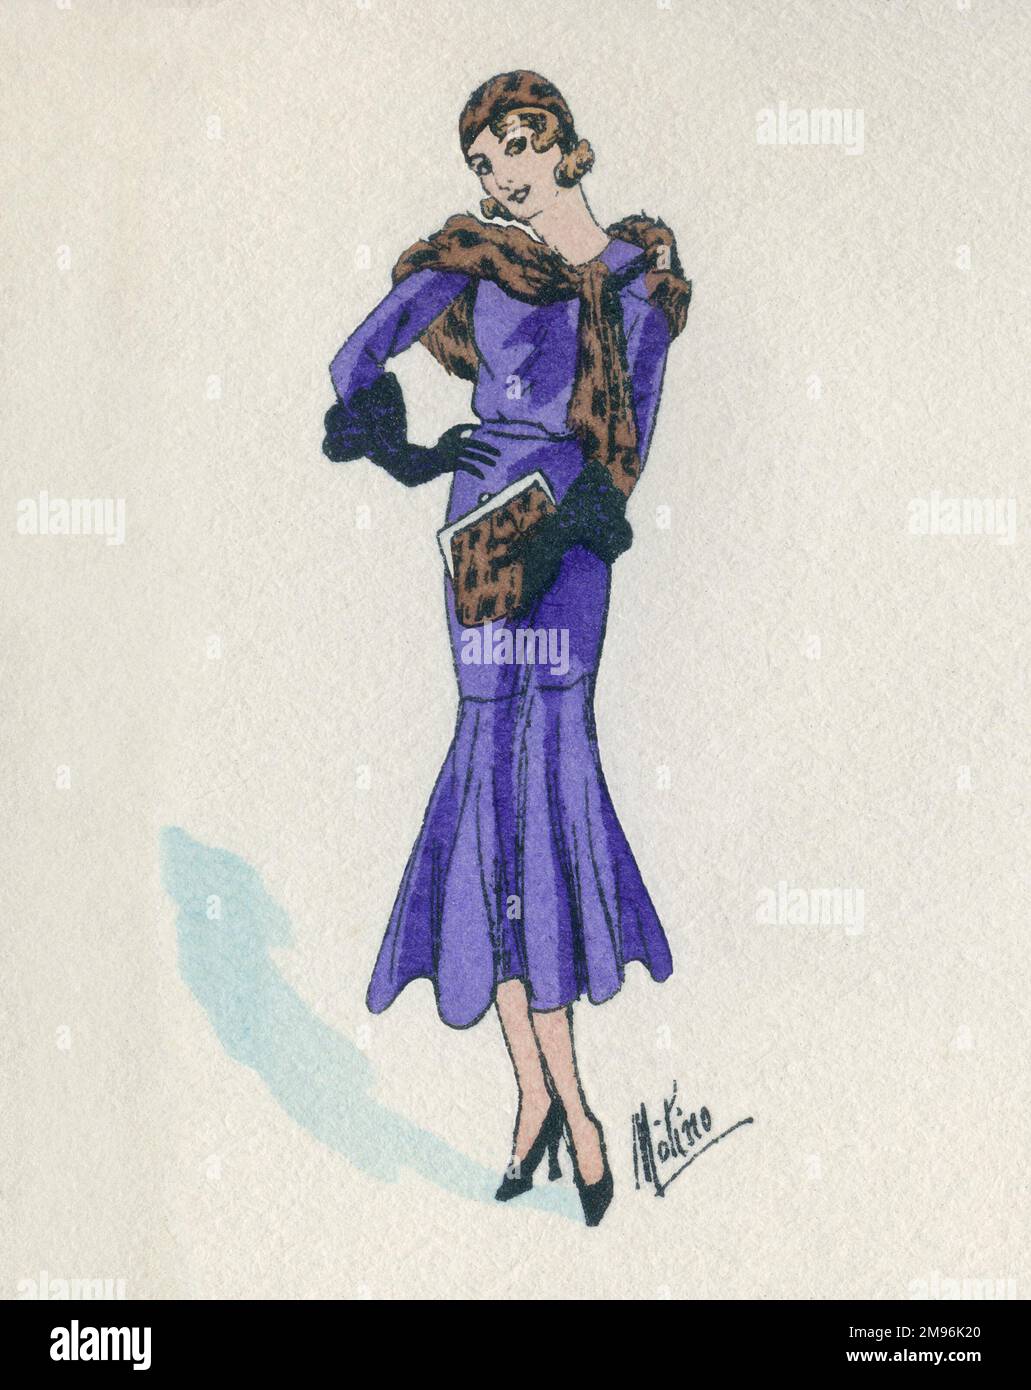 Business card design, depicting an elegant woman in a purple outfit with fur trimming, and matching hat and handbag. Stock Photo